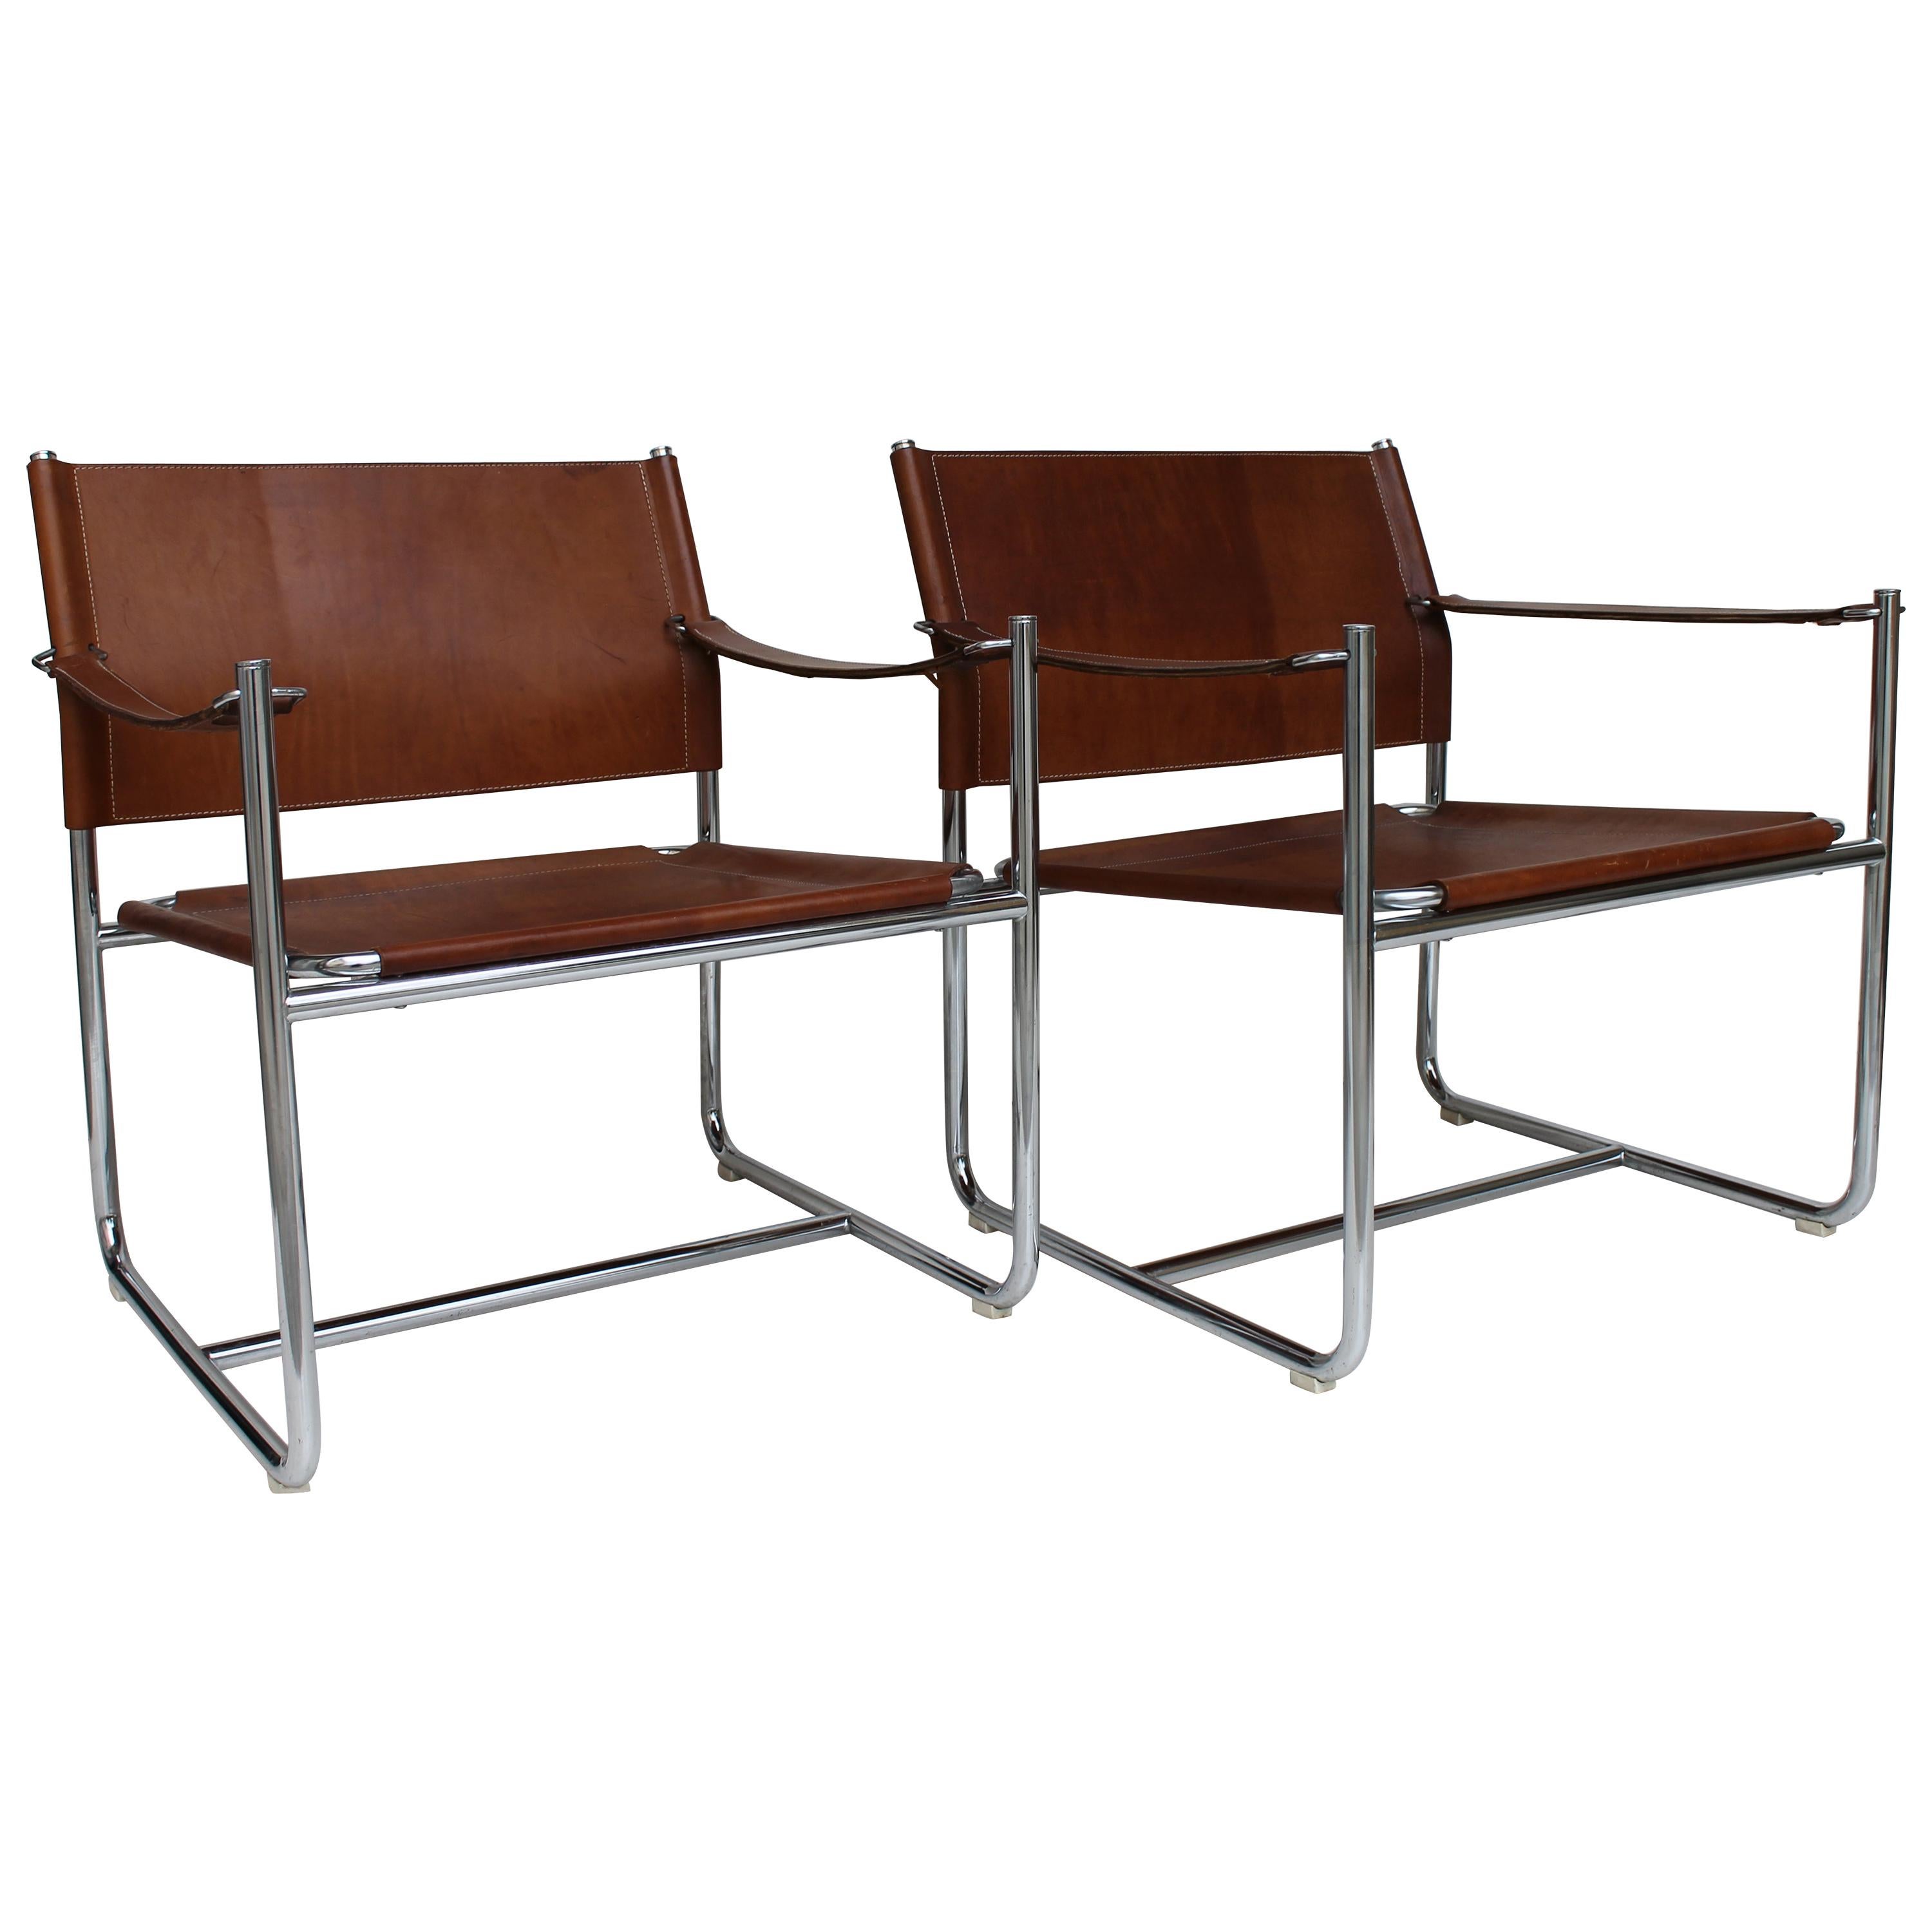 Set of Two Steel and Brown Leather Easy Chair "Amiral" by K Mobring, Sweden 1967